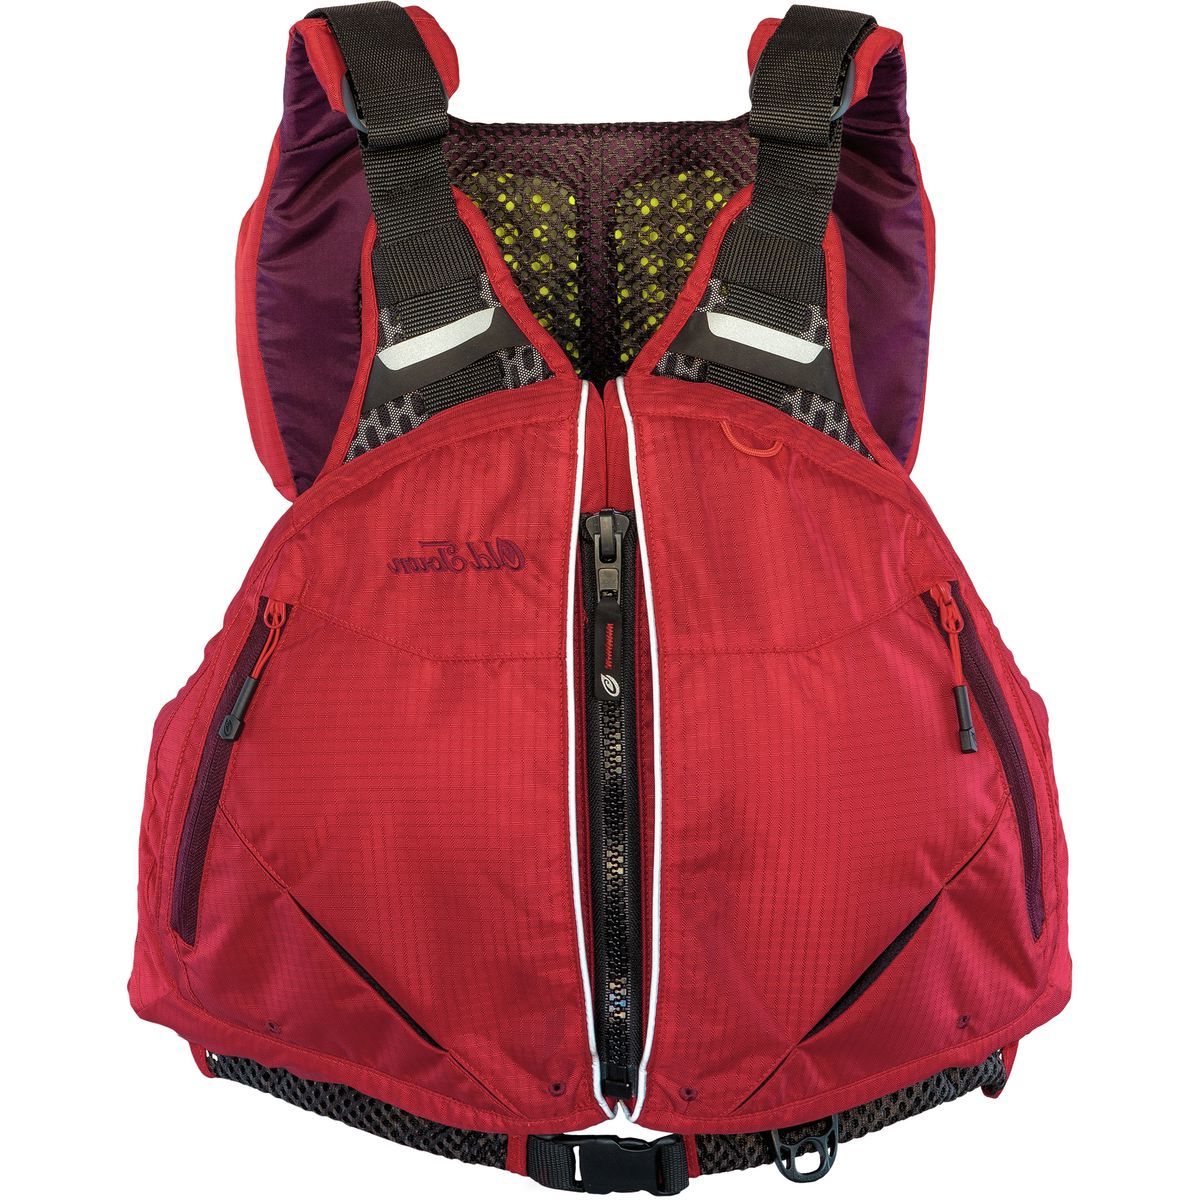 Old Town Solitude Personal Flotation Device - Men's